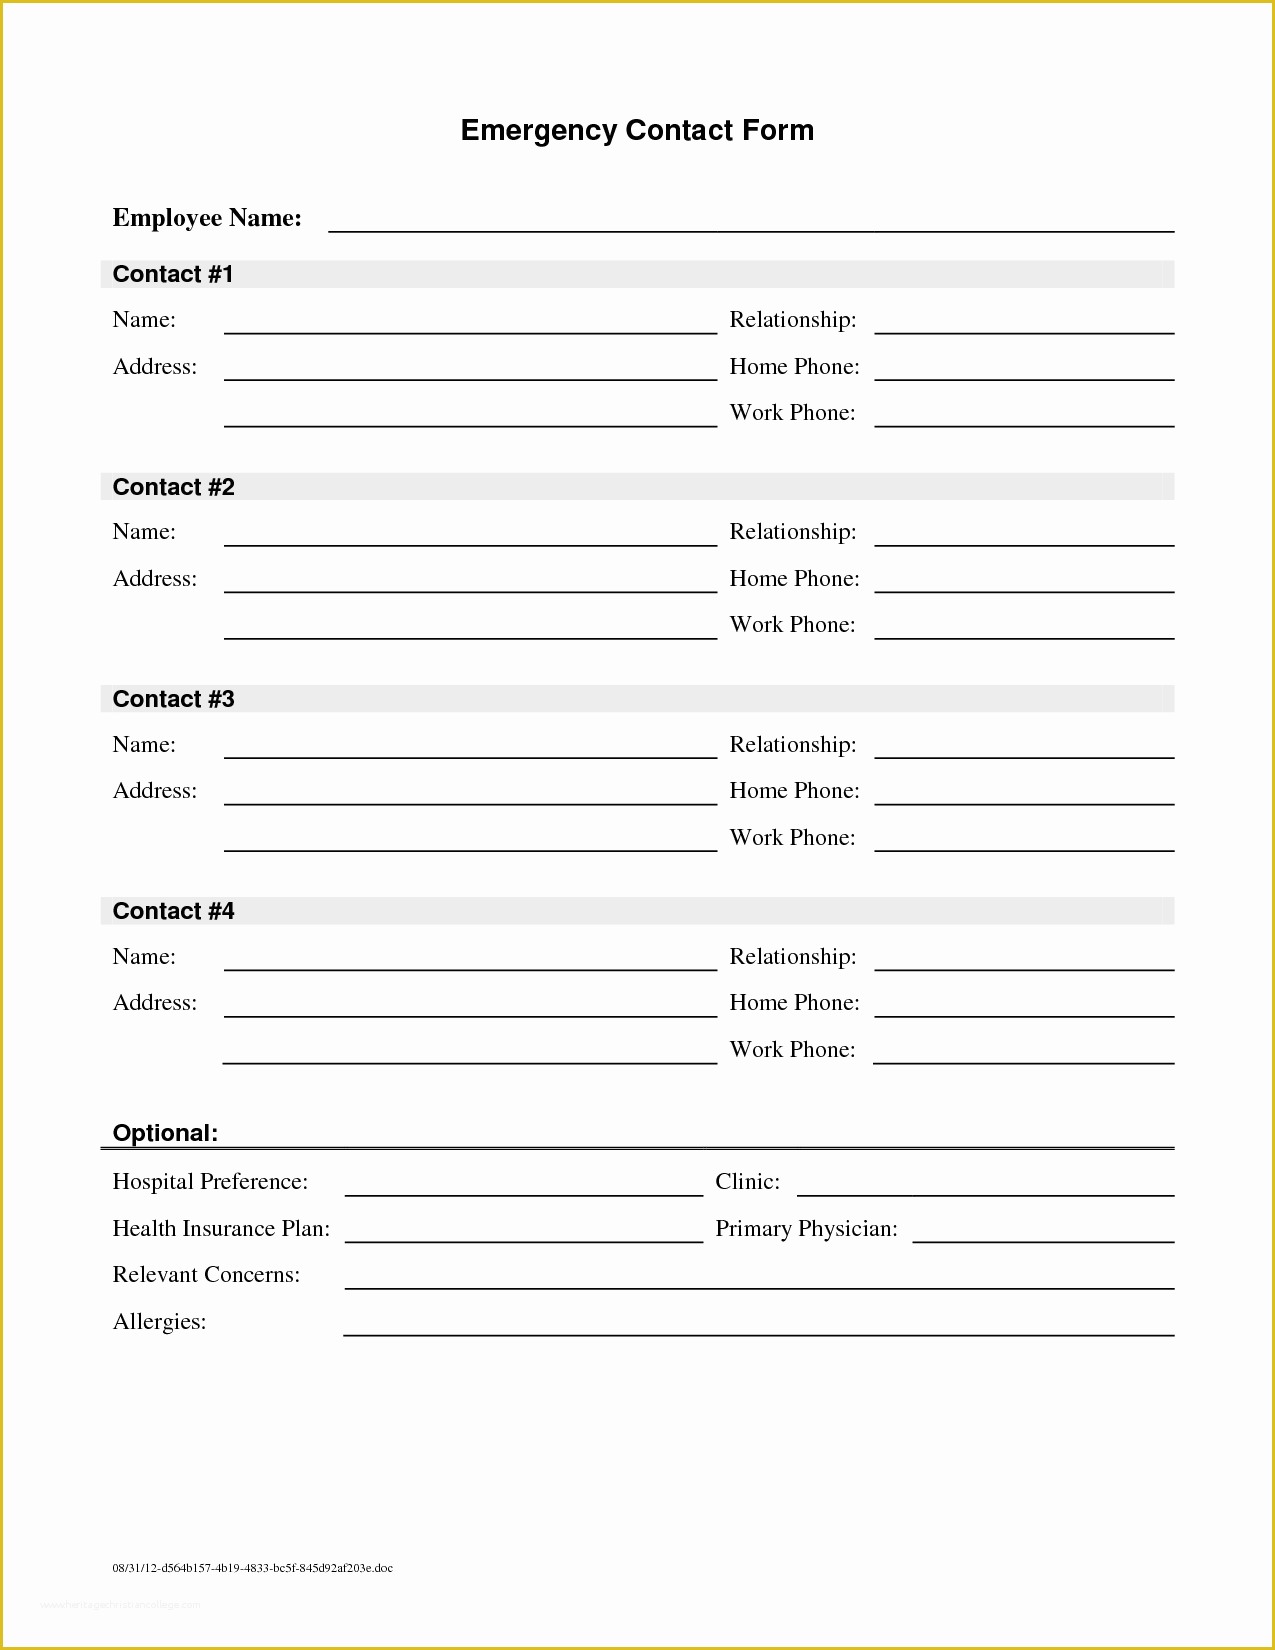 Free Contact Information Template Of Employee Emergency Contact Printable form to Pin